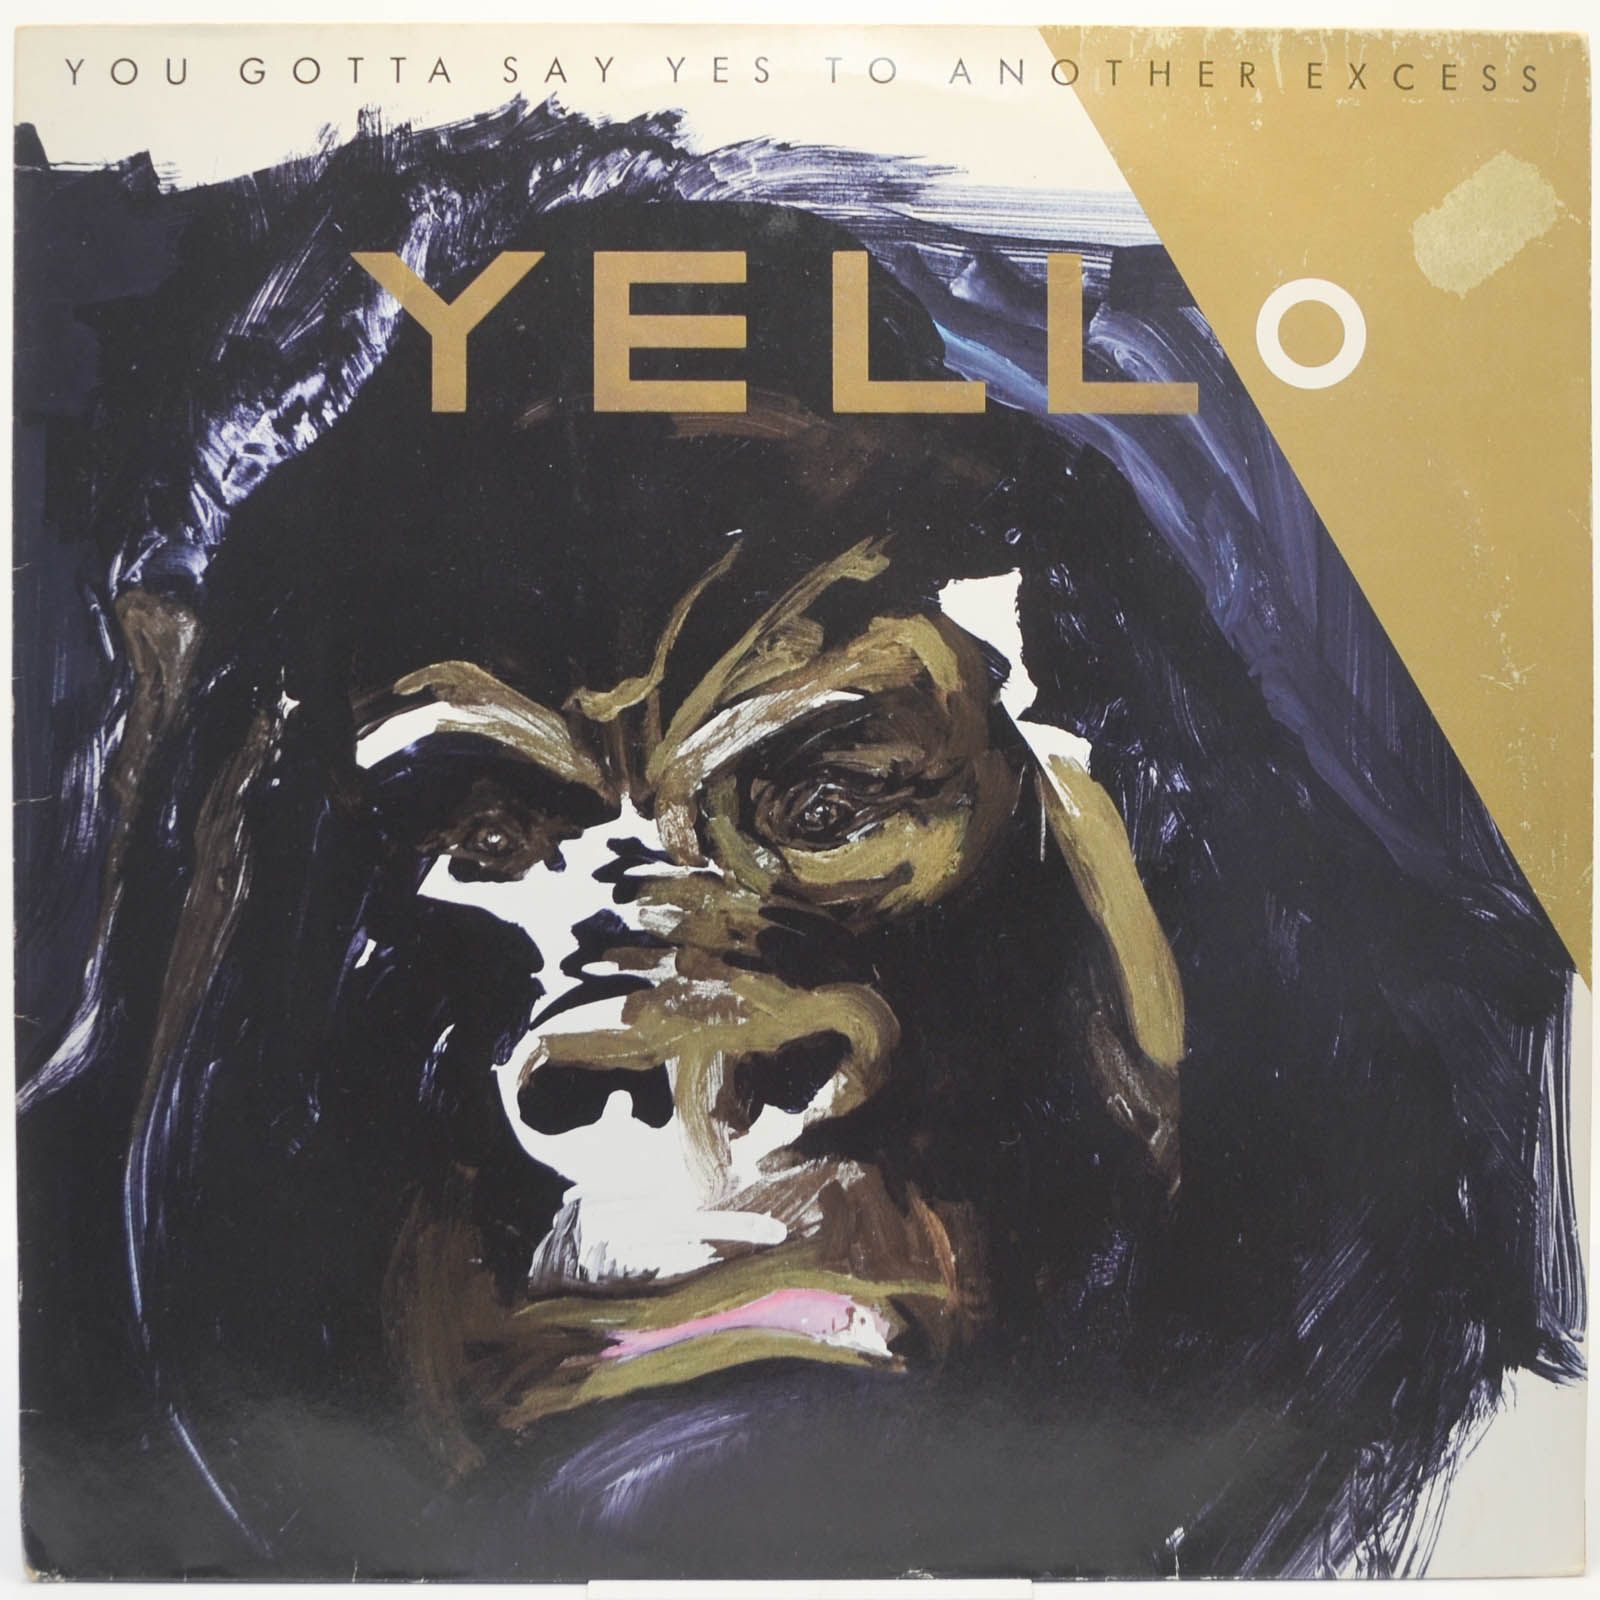 Yello — You Gotta Say Yes To A Other Excess, 1983